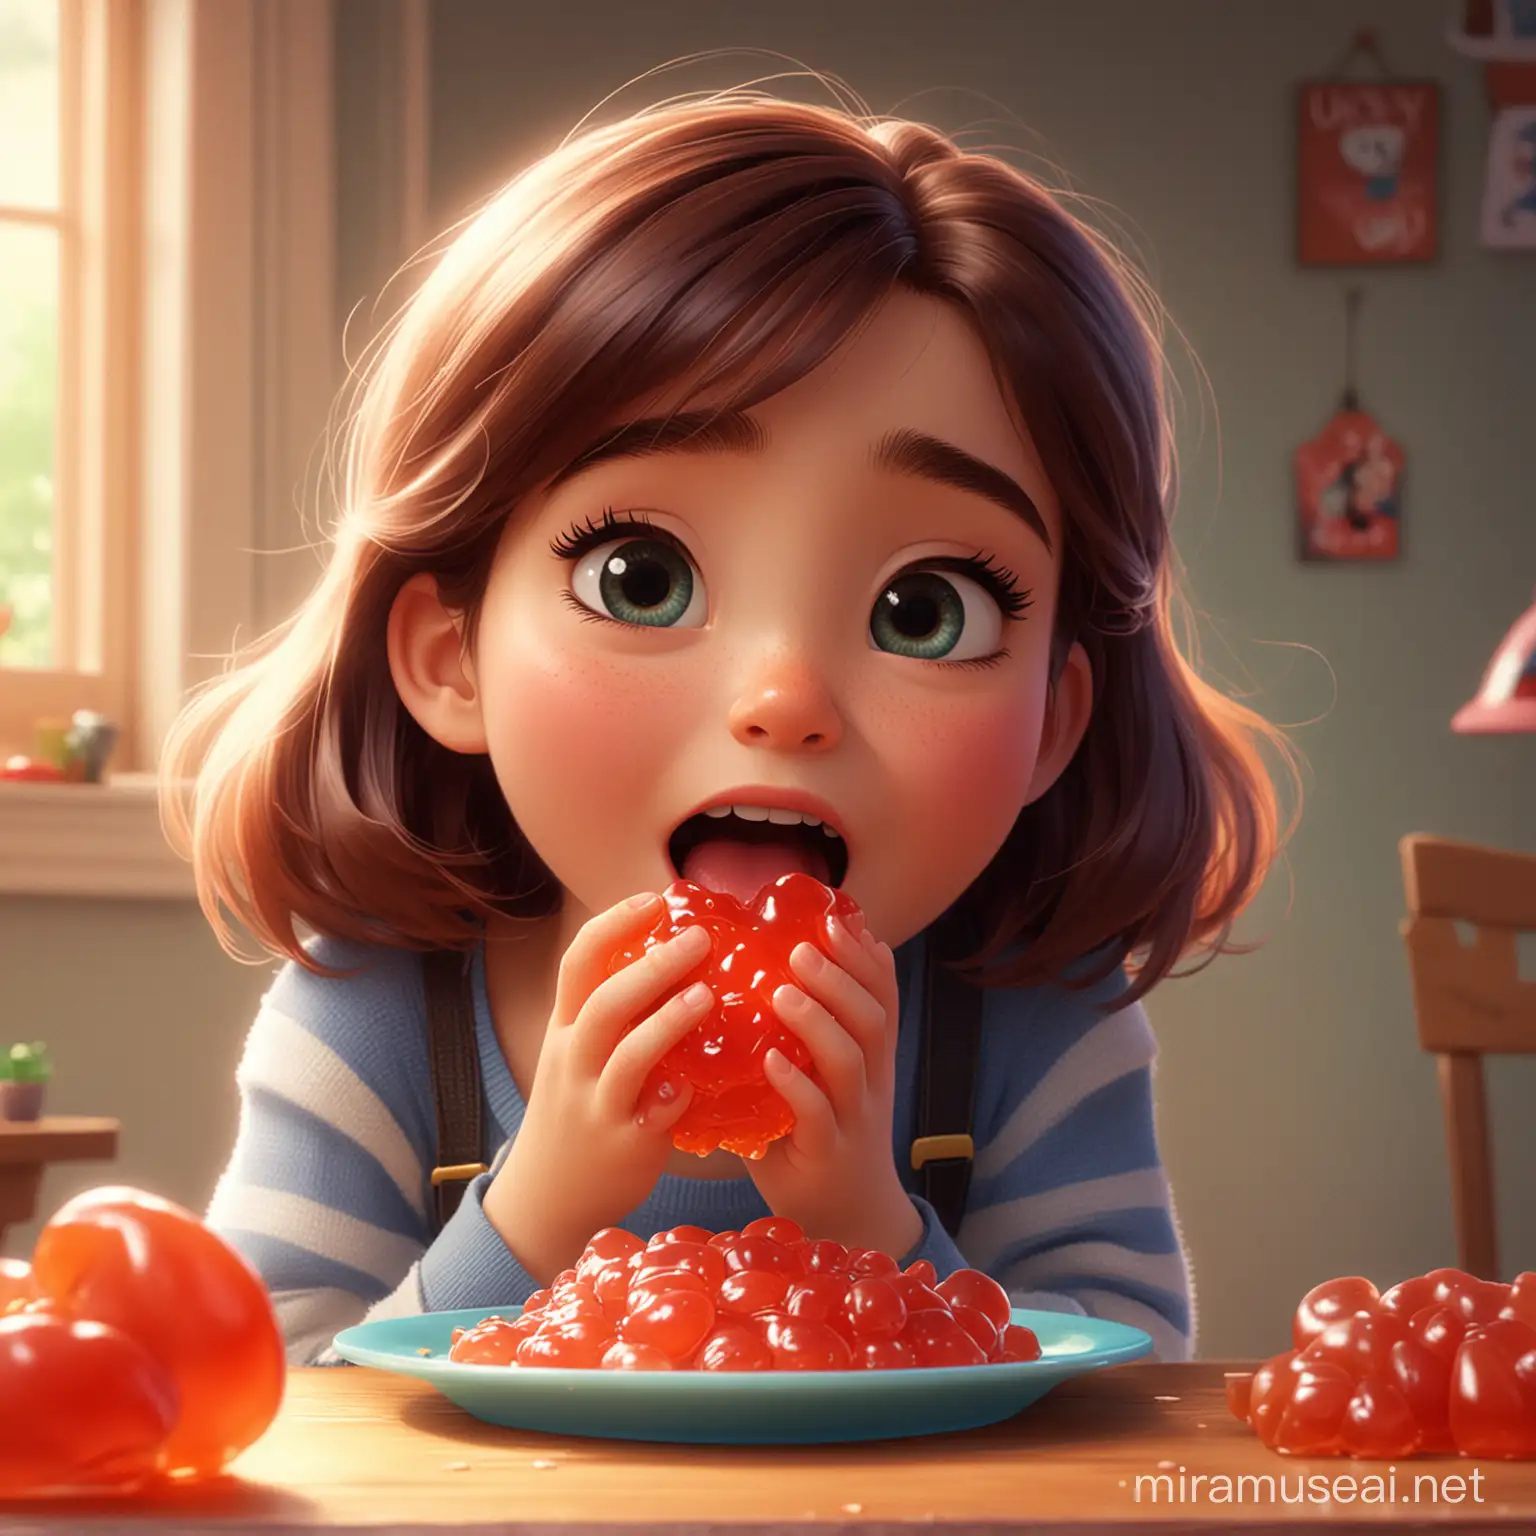 Girl Enjoying a Colorful Jelly in Disney Pixar Style